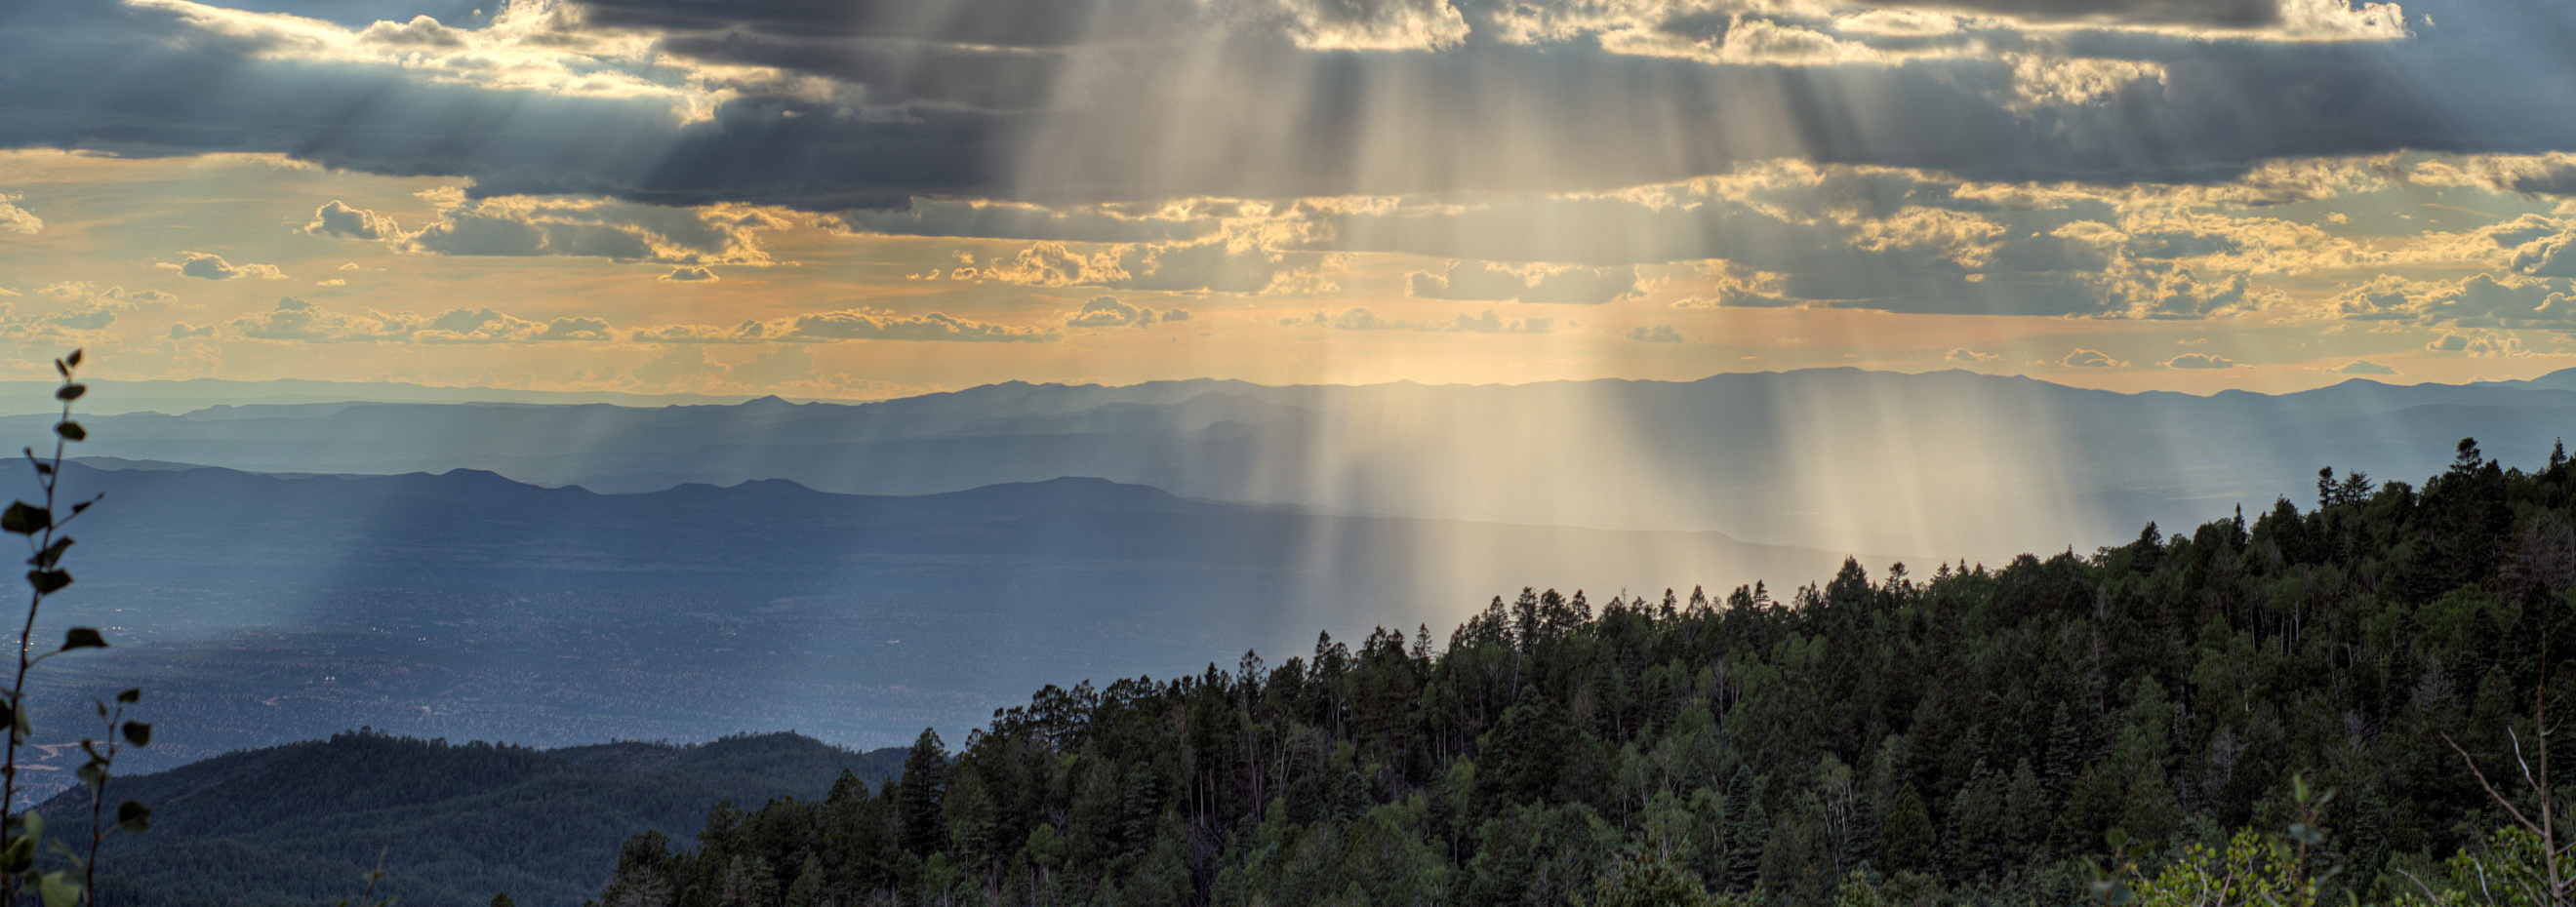 Image of Santa Fe valley in New Mexico, with rays of sunlight beaming through scattered clouds above.